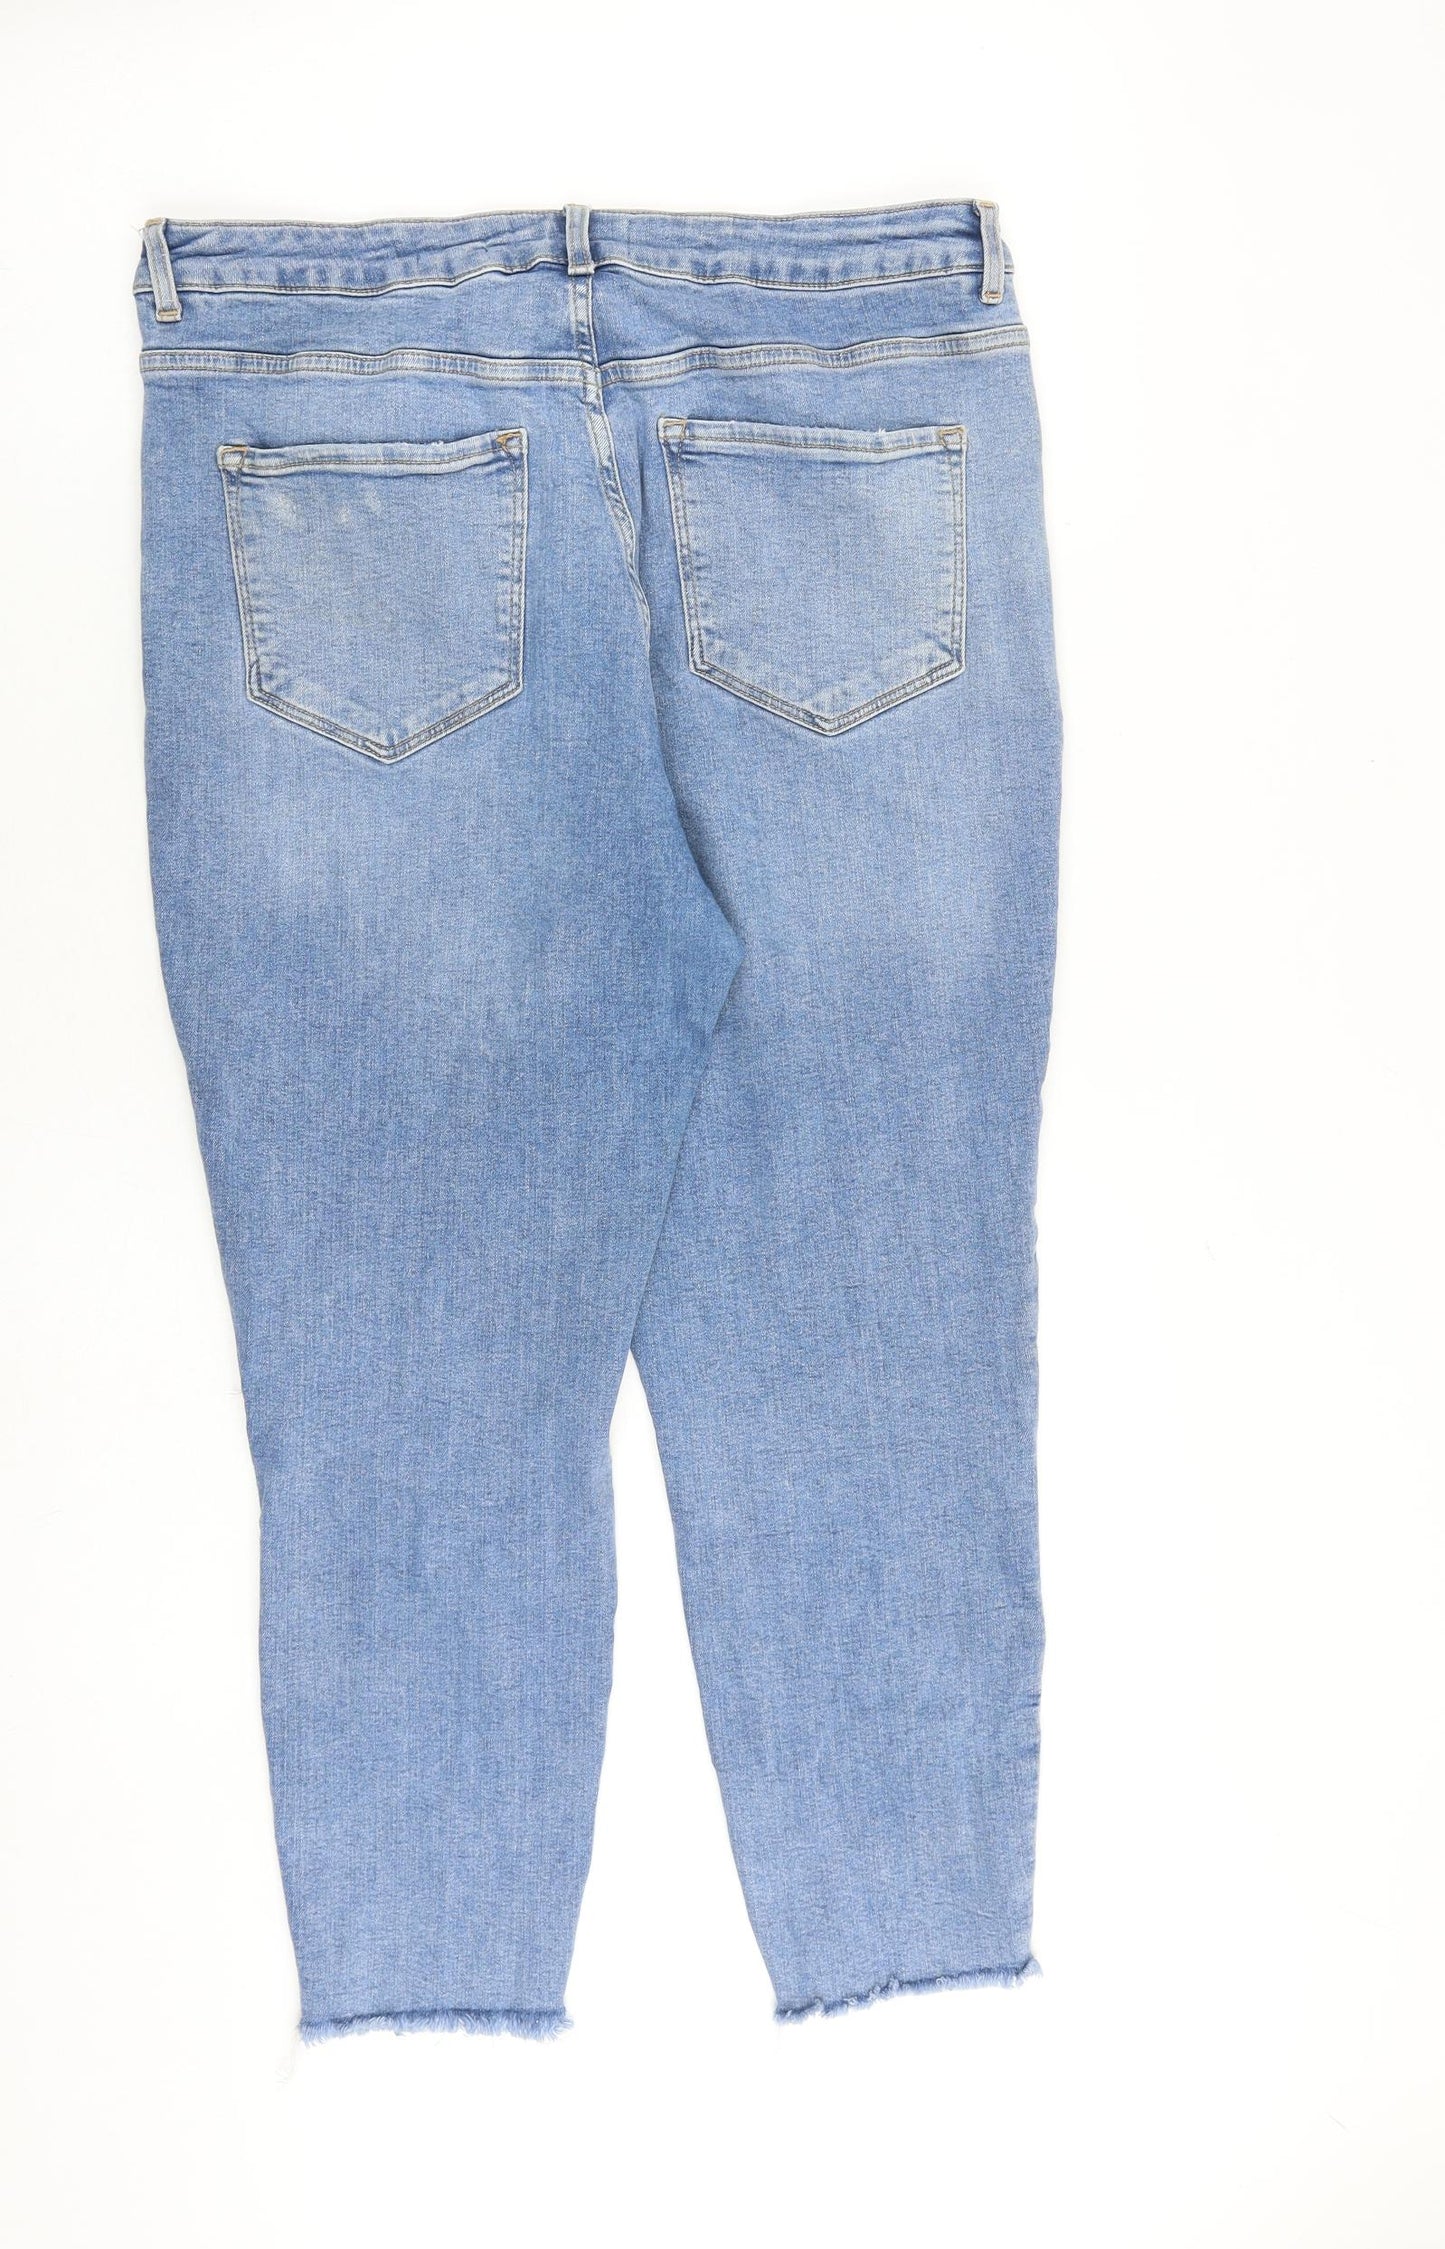 New Look Womens Blue Cotton Skinny Jeans Size 16 L26 in Slim Zip